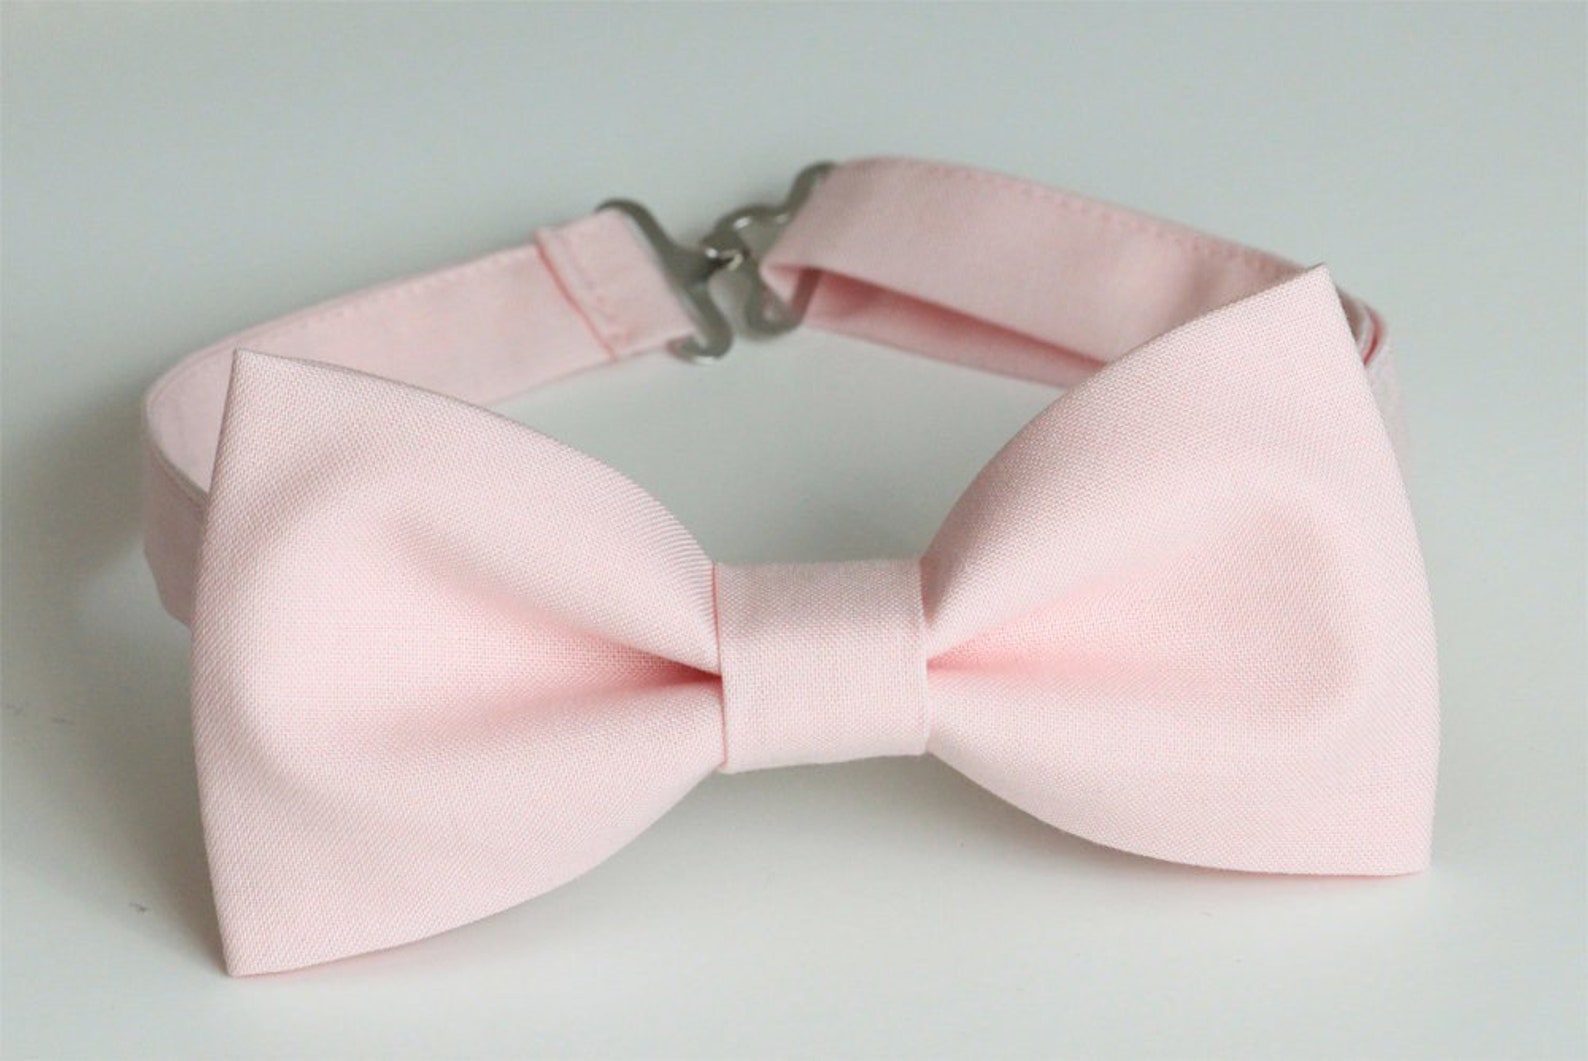 Light pink bow tie blush pink bow tie wedding bow tie | Etsy